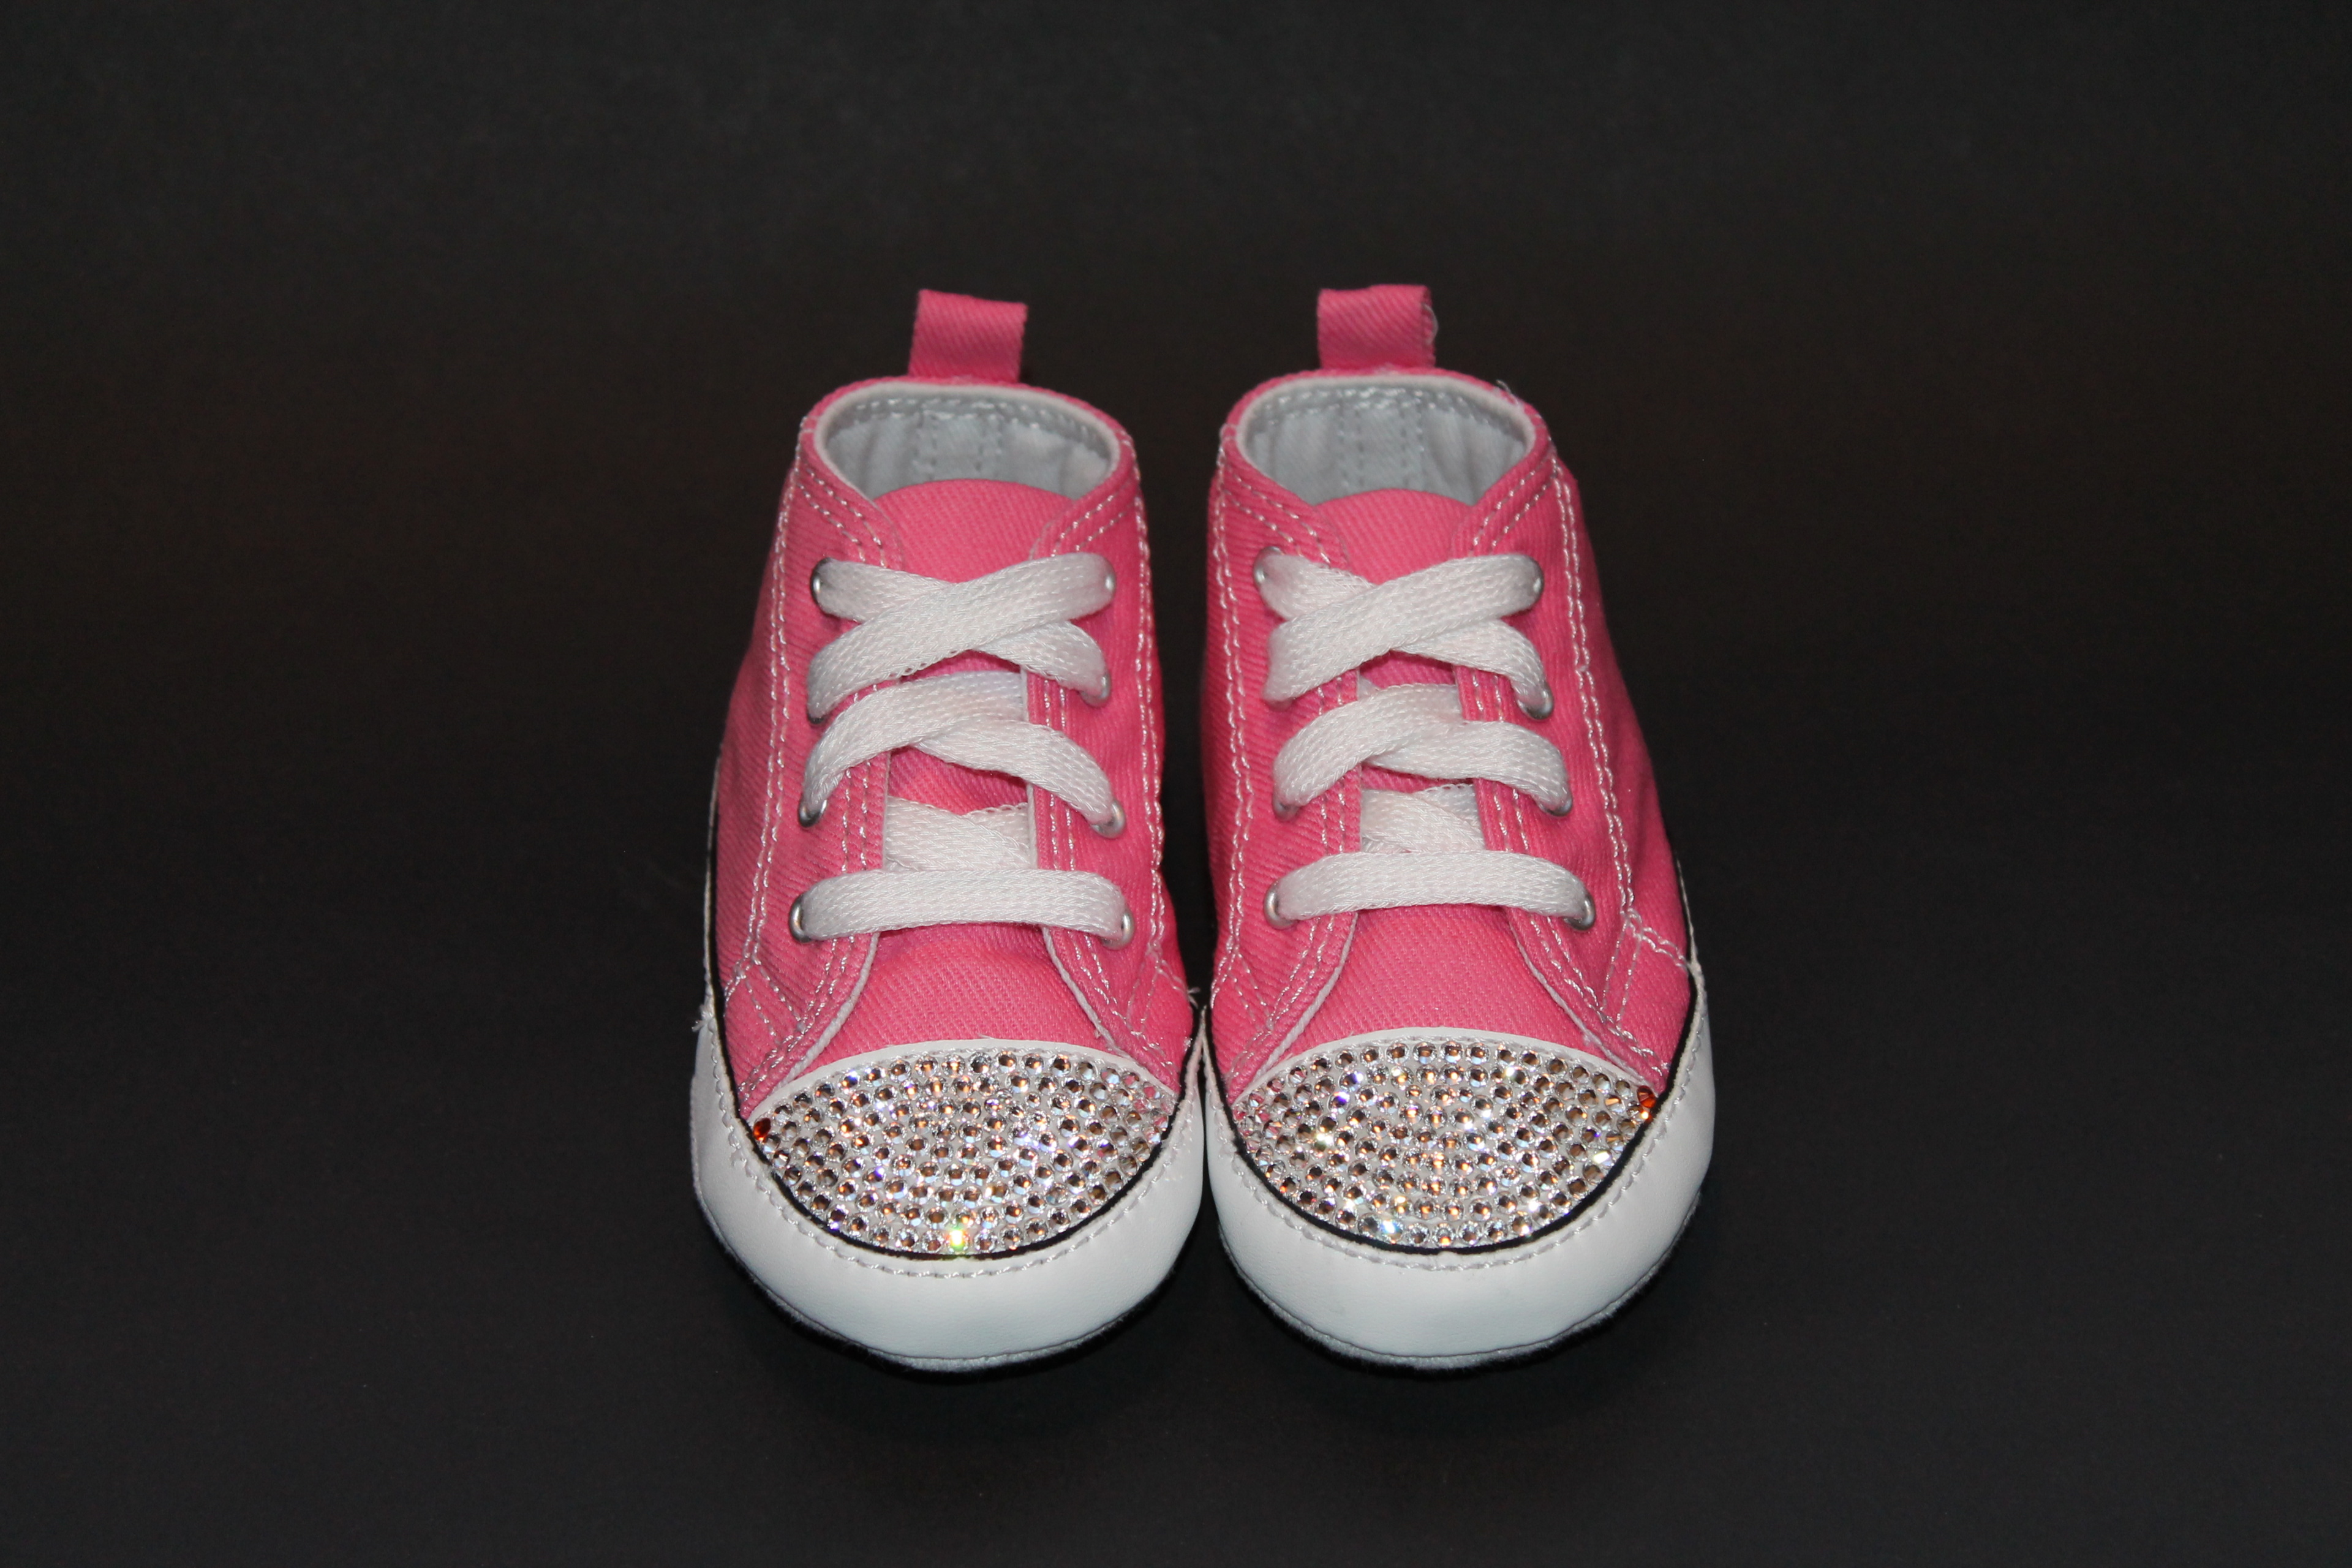 Funky Pink Converse Crib Shoes